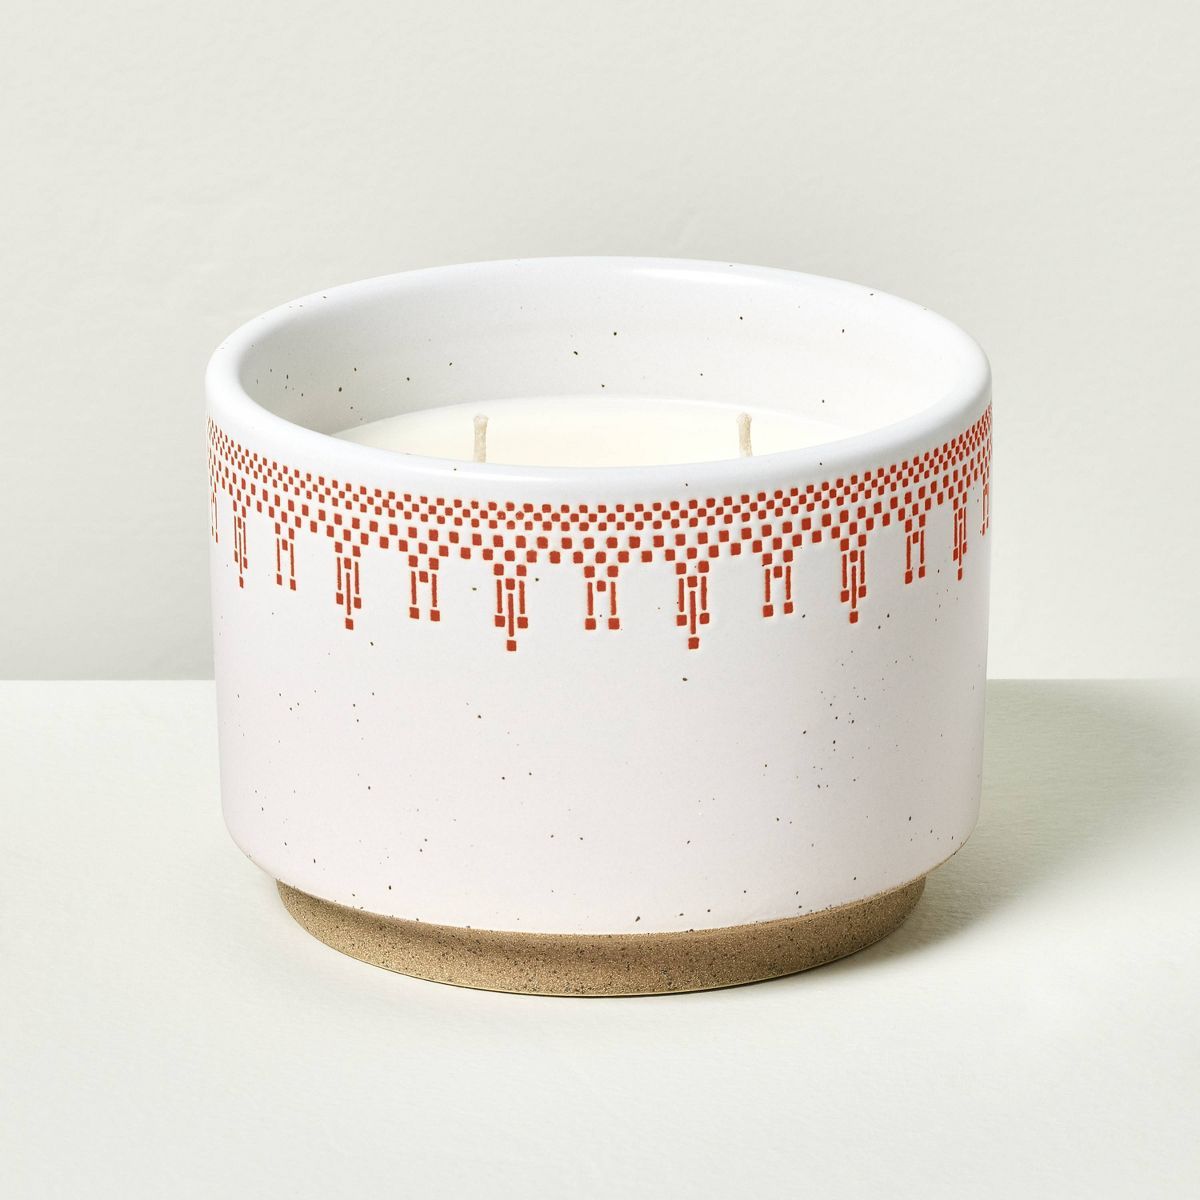 2-Wick Patterned Ceramic Sunkissed Ginger Jar Candle 11.7oz Red - Hearth & Hand™ with Magnolia | Target